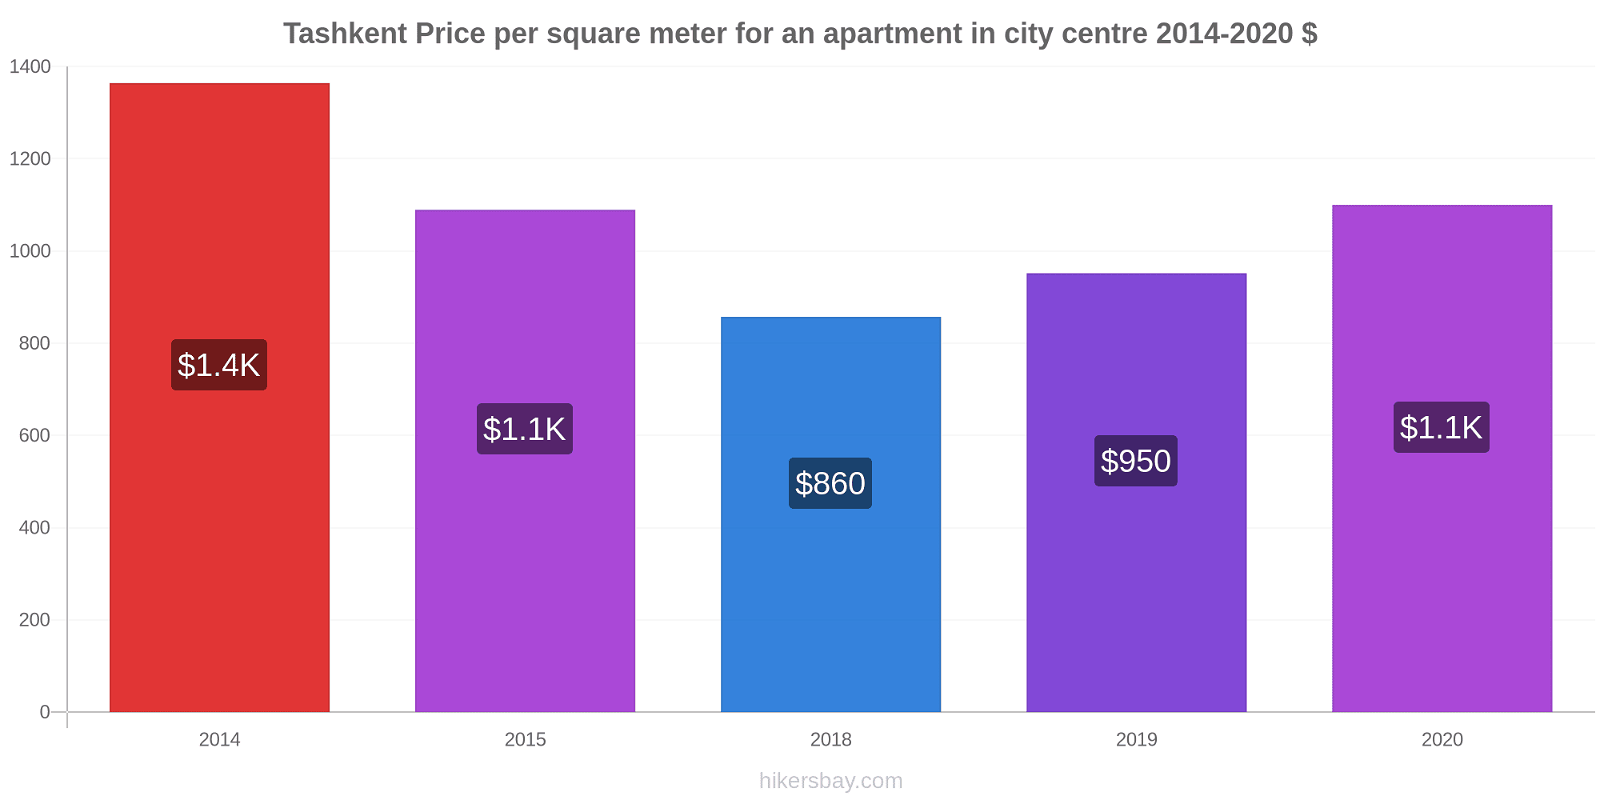 Tashkent price changes Price per square meter for an apartment in city centre hikersbay.com